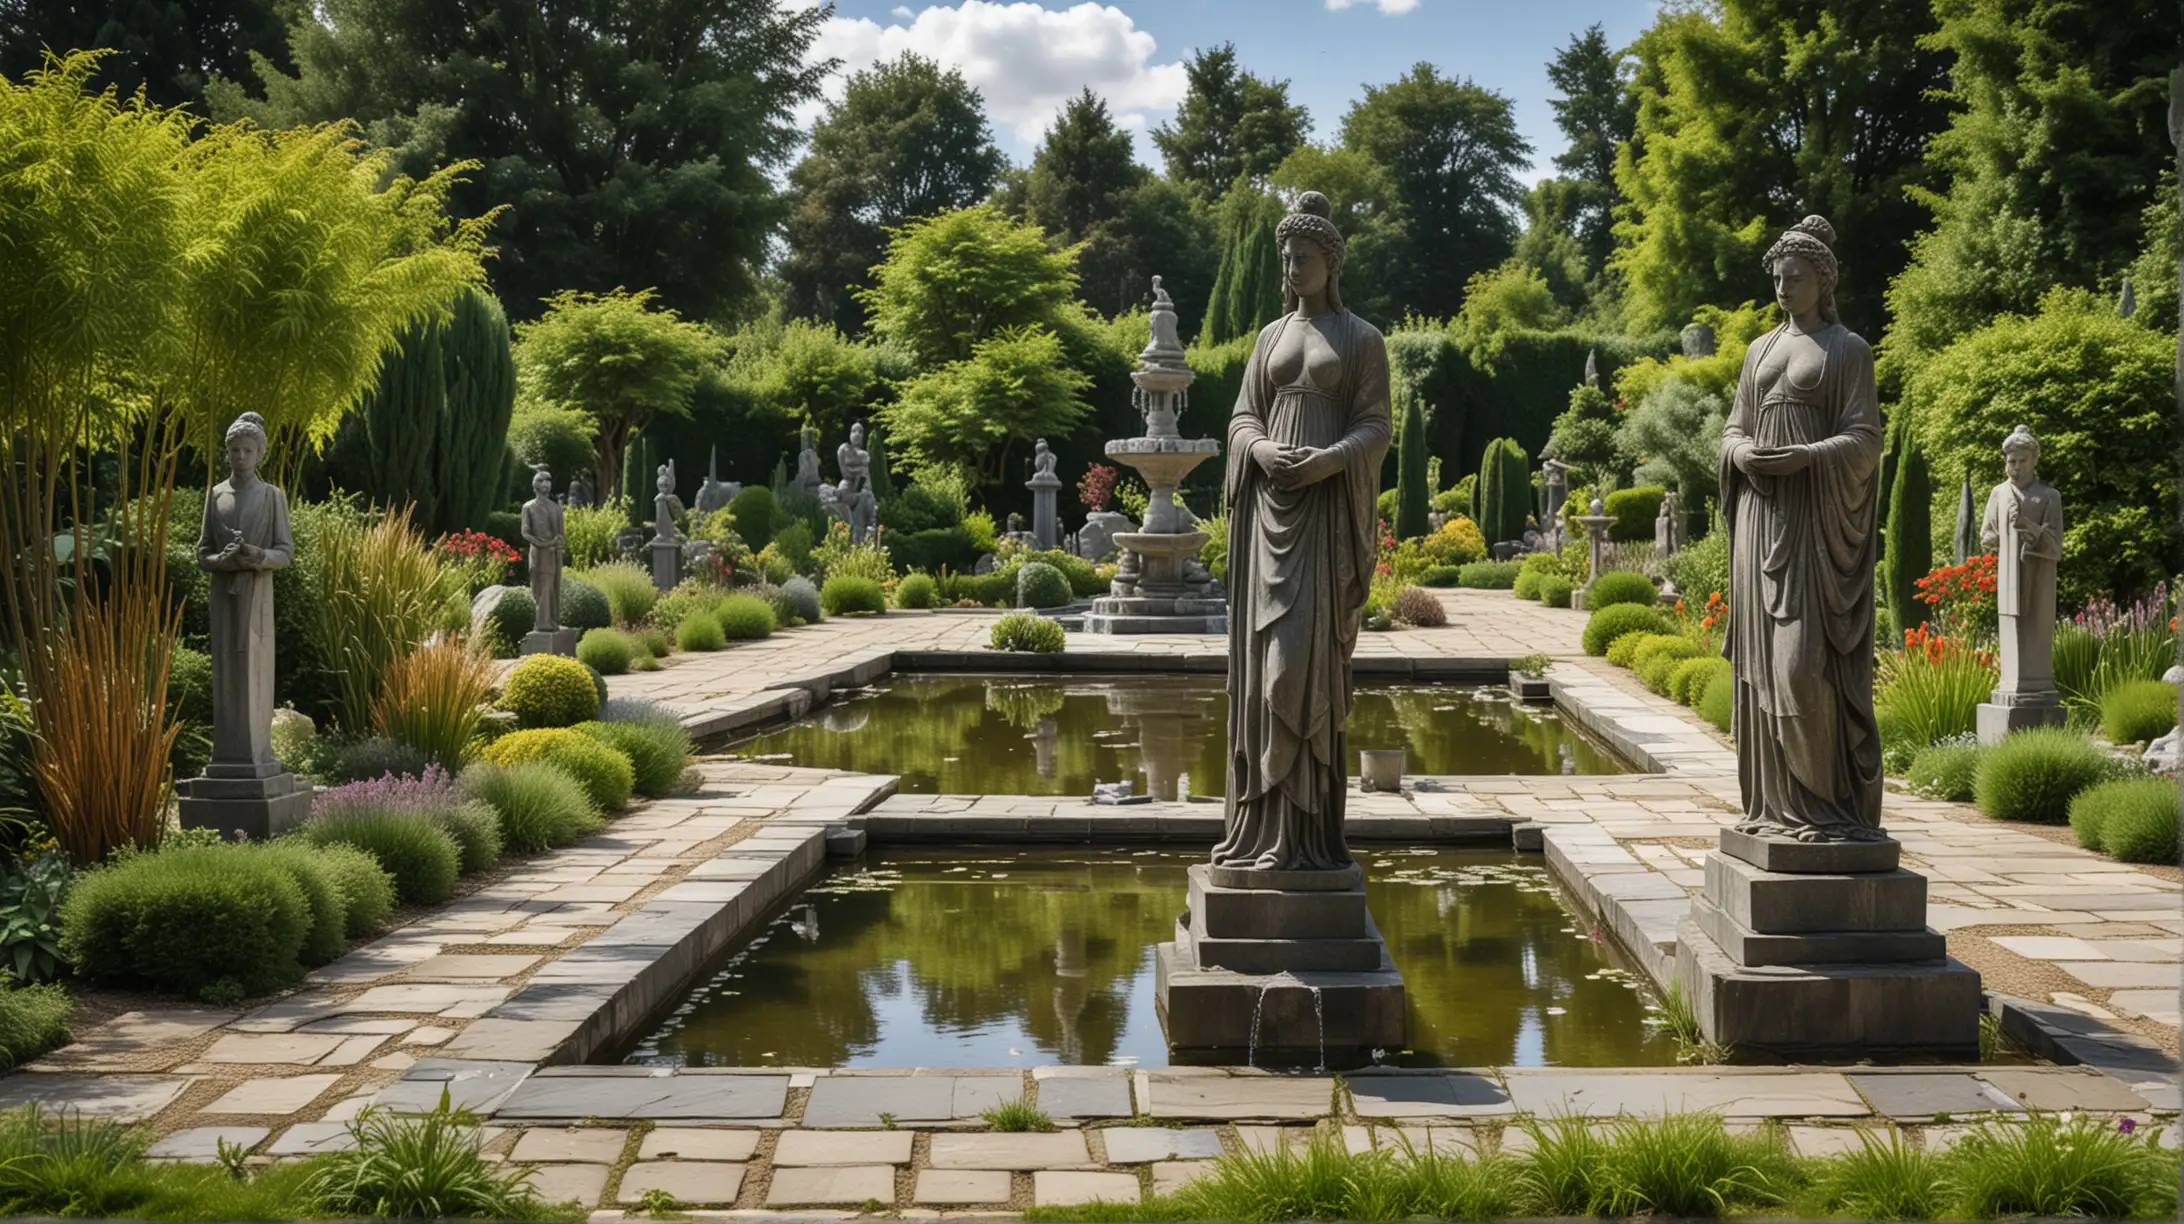 Serene Garden with Slate Statues and Tranquil Ponds